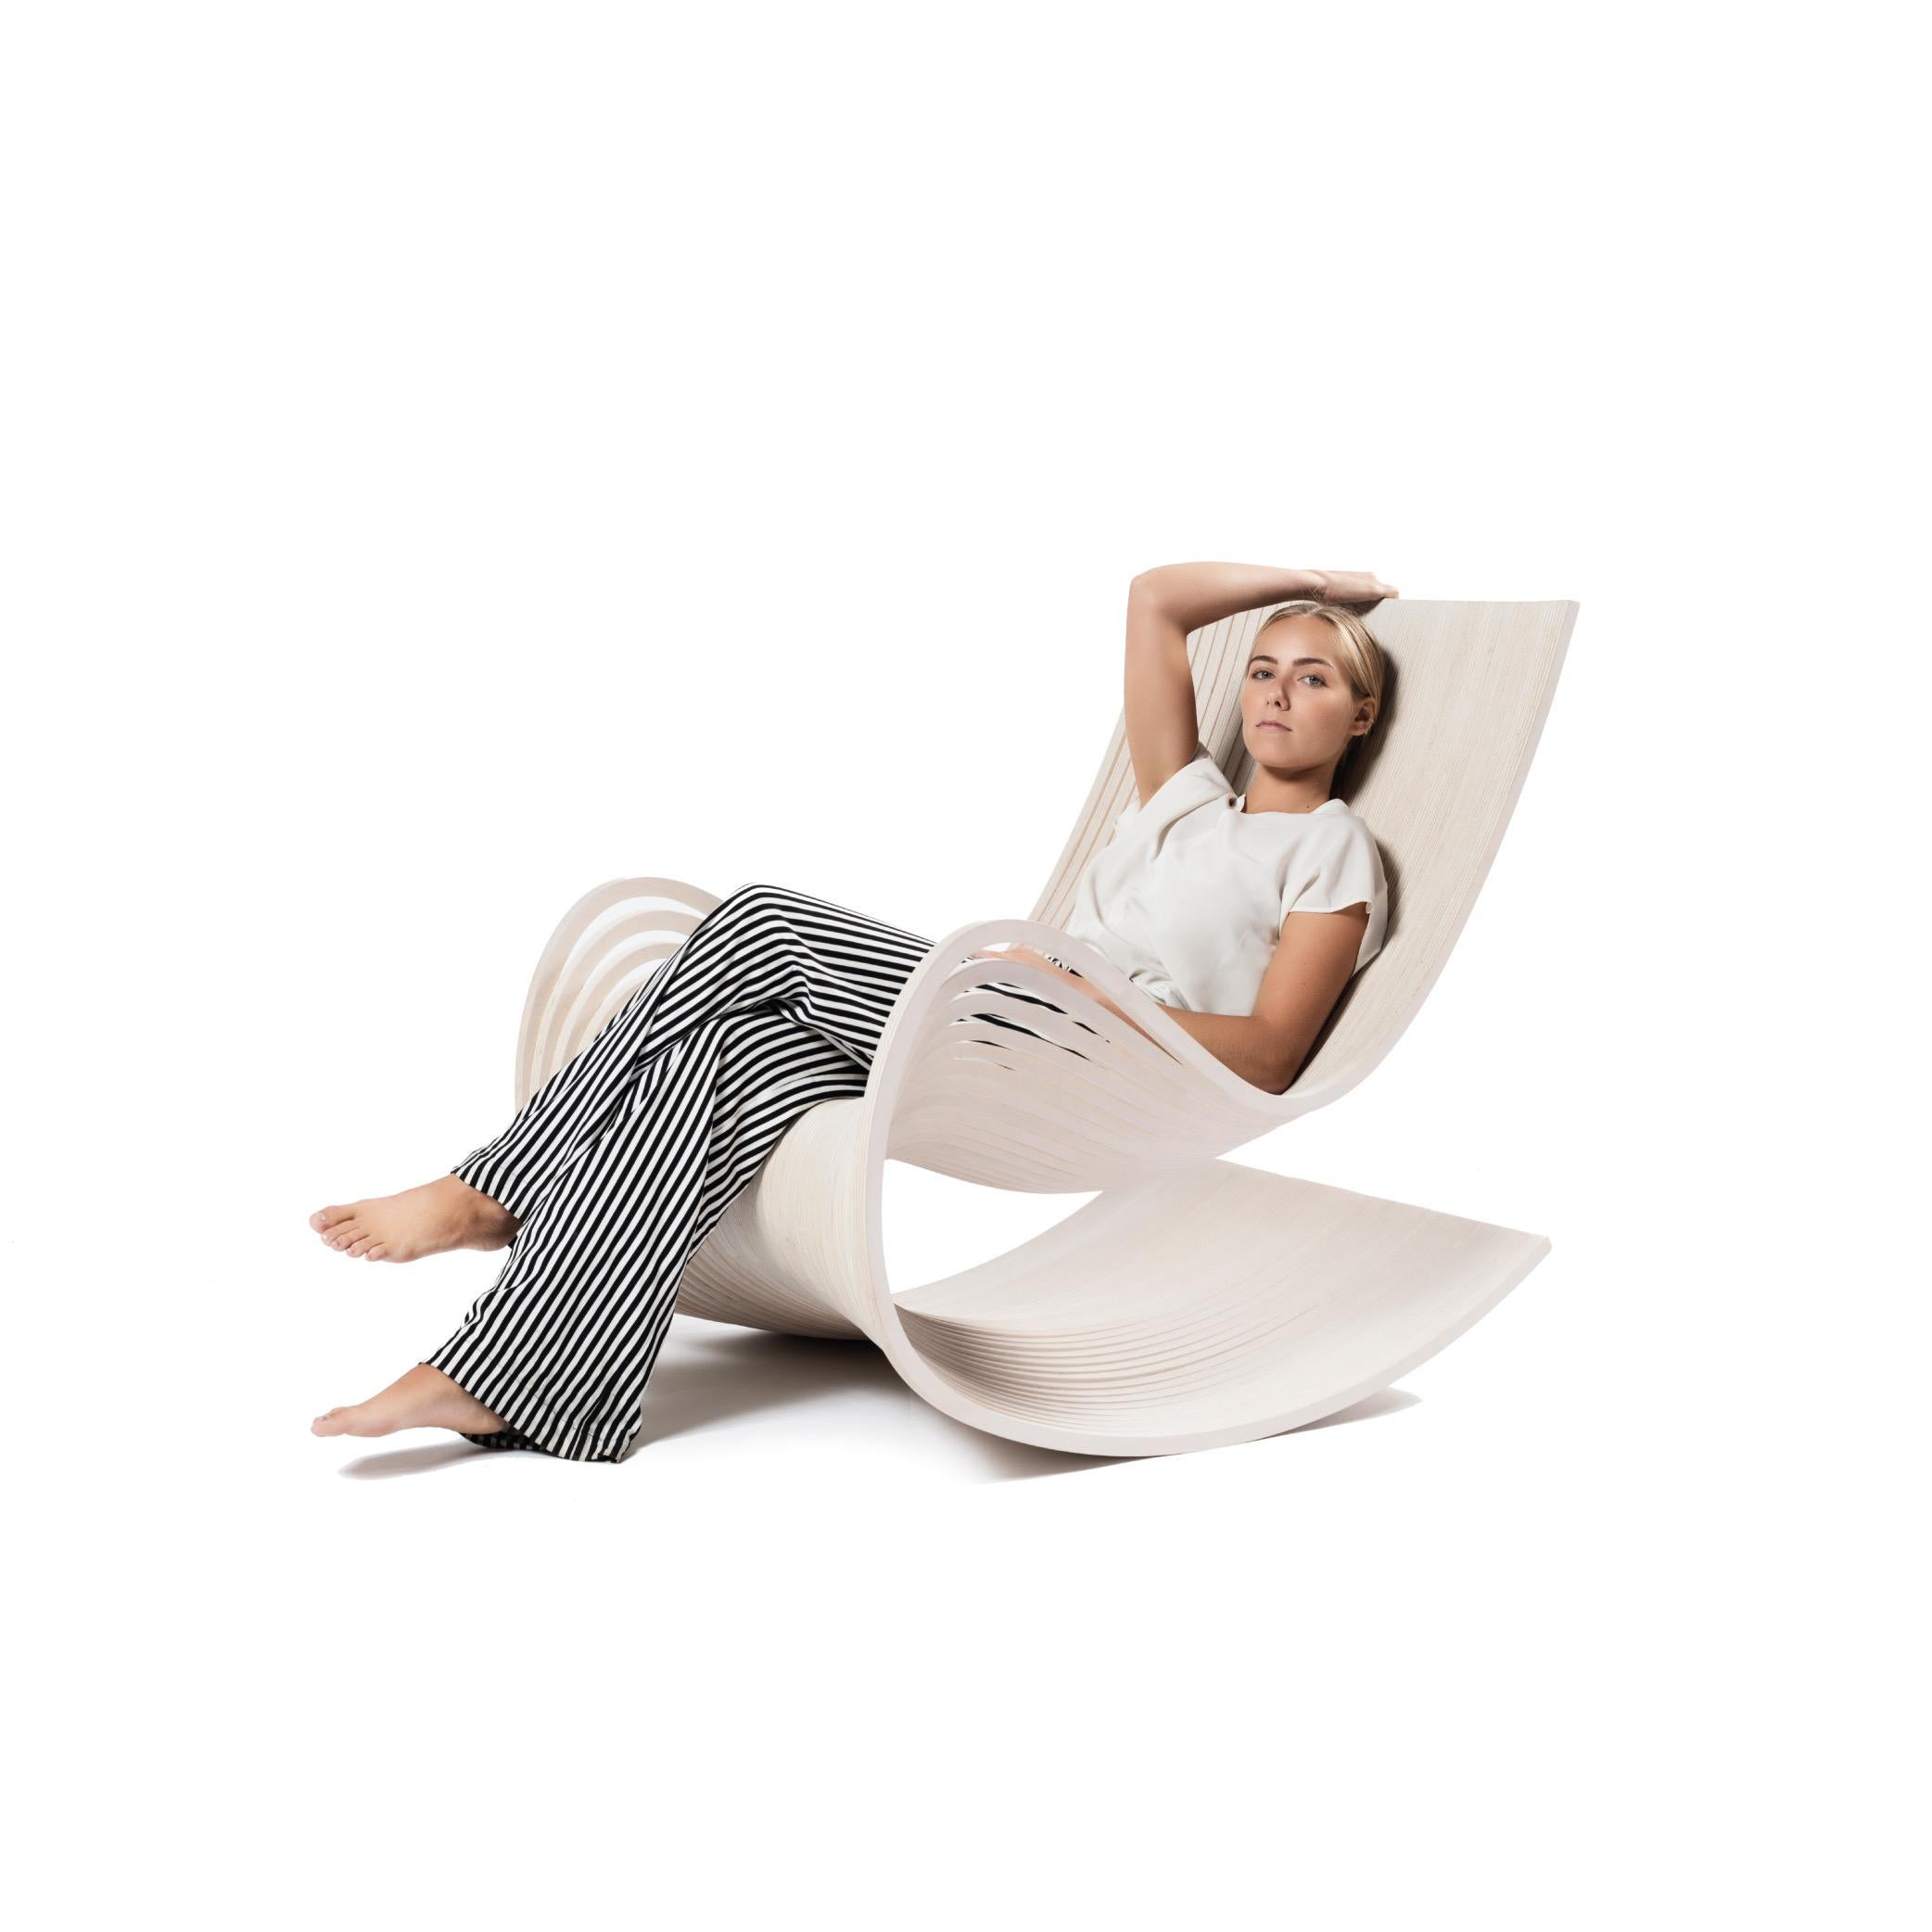 Laminated Vic Rocking Chair by Piegatto, a Sculptural Contemporary Rocker For Sale